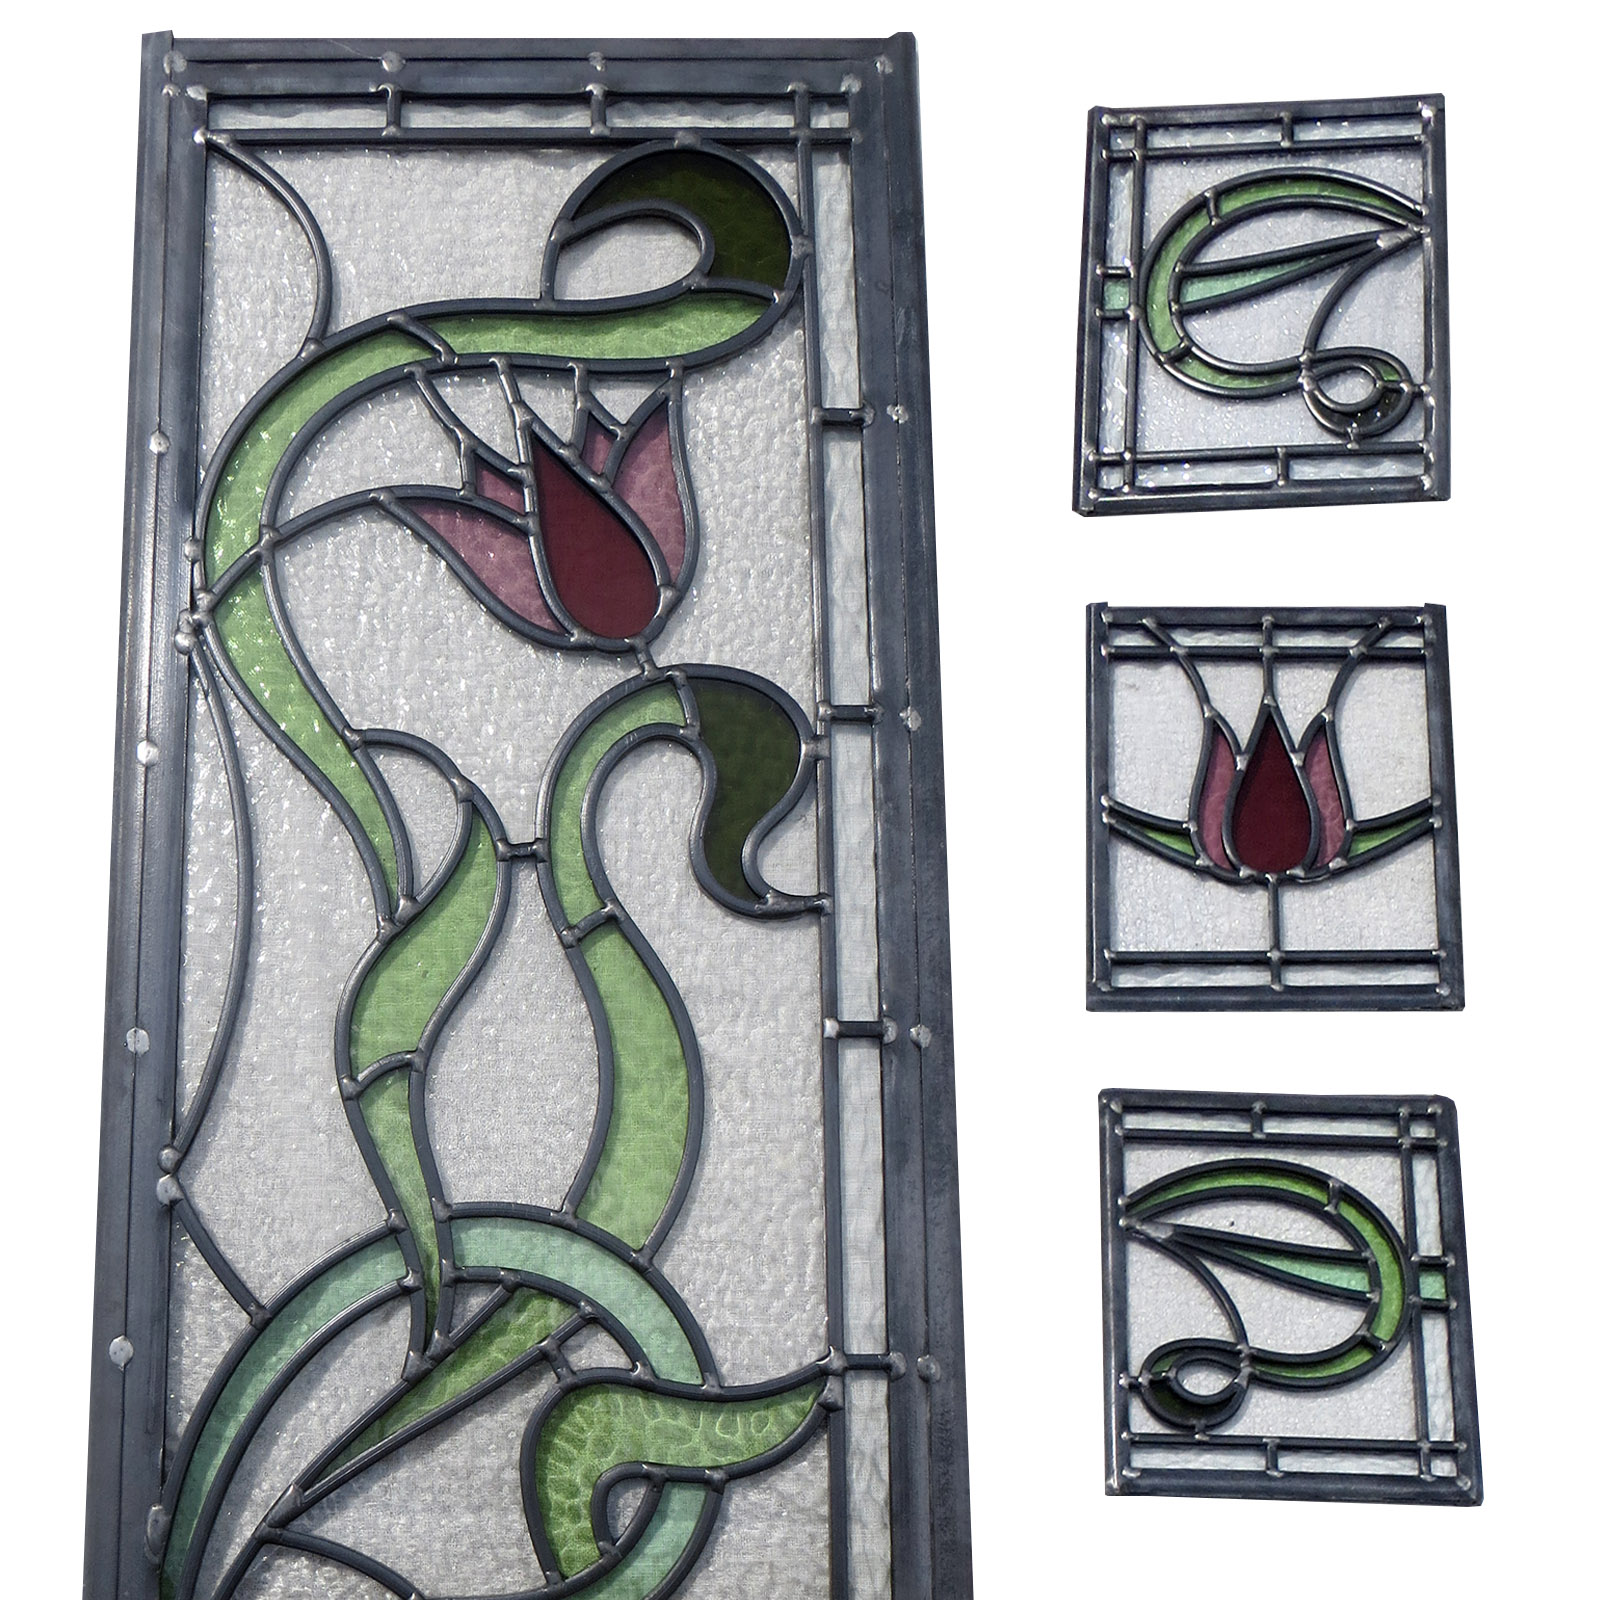 Intricate Art Nouveau Stained Glass Panels